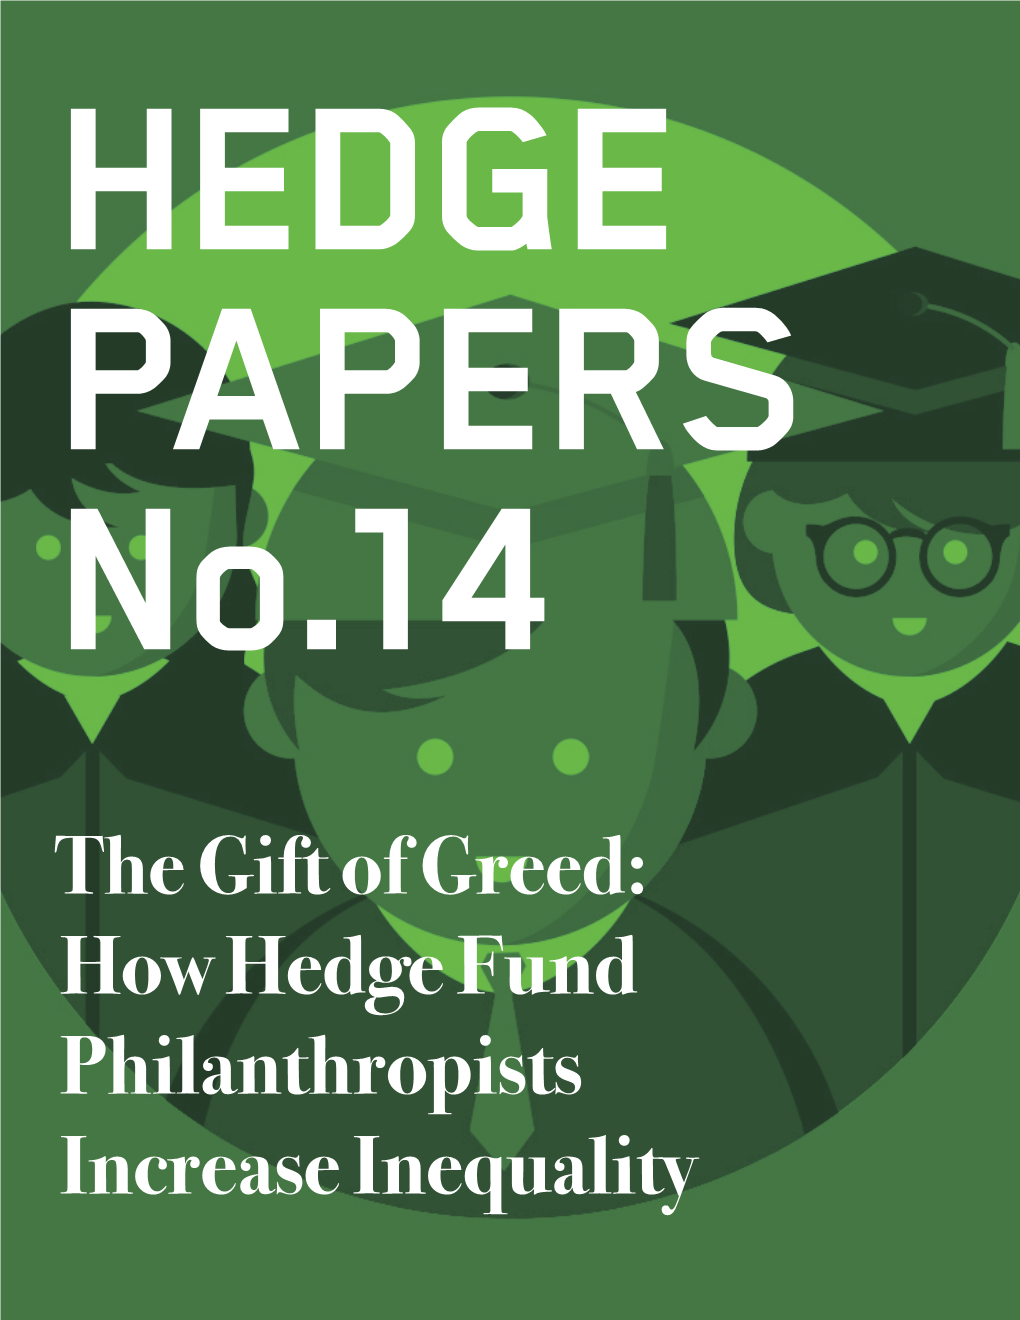 How Hedge Fund Philanthropists Increase Inequality “Consider This